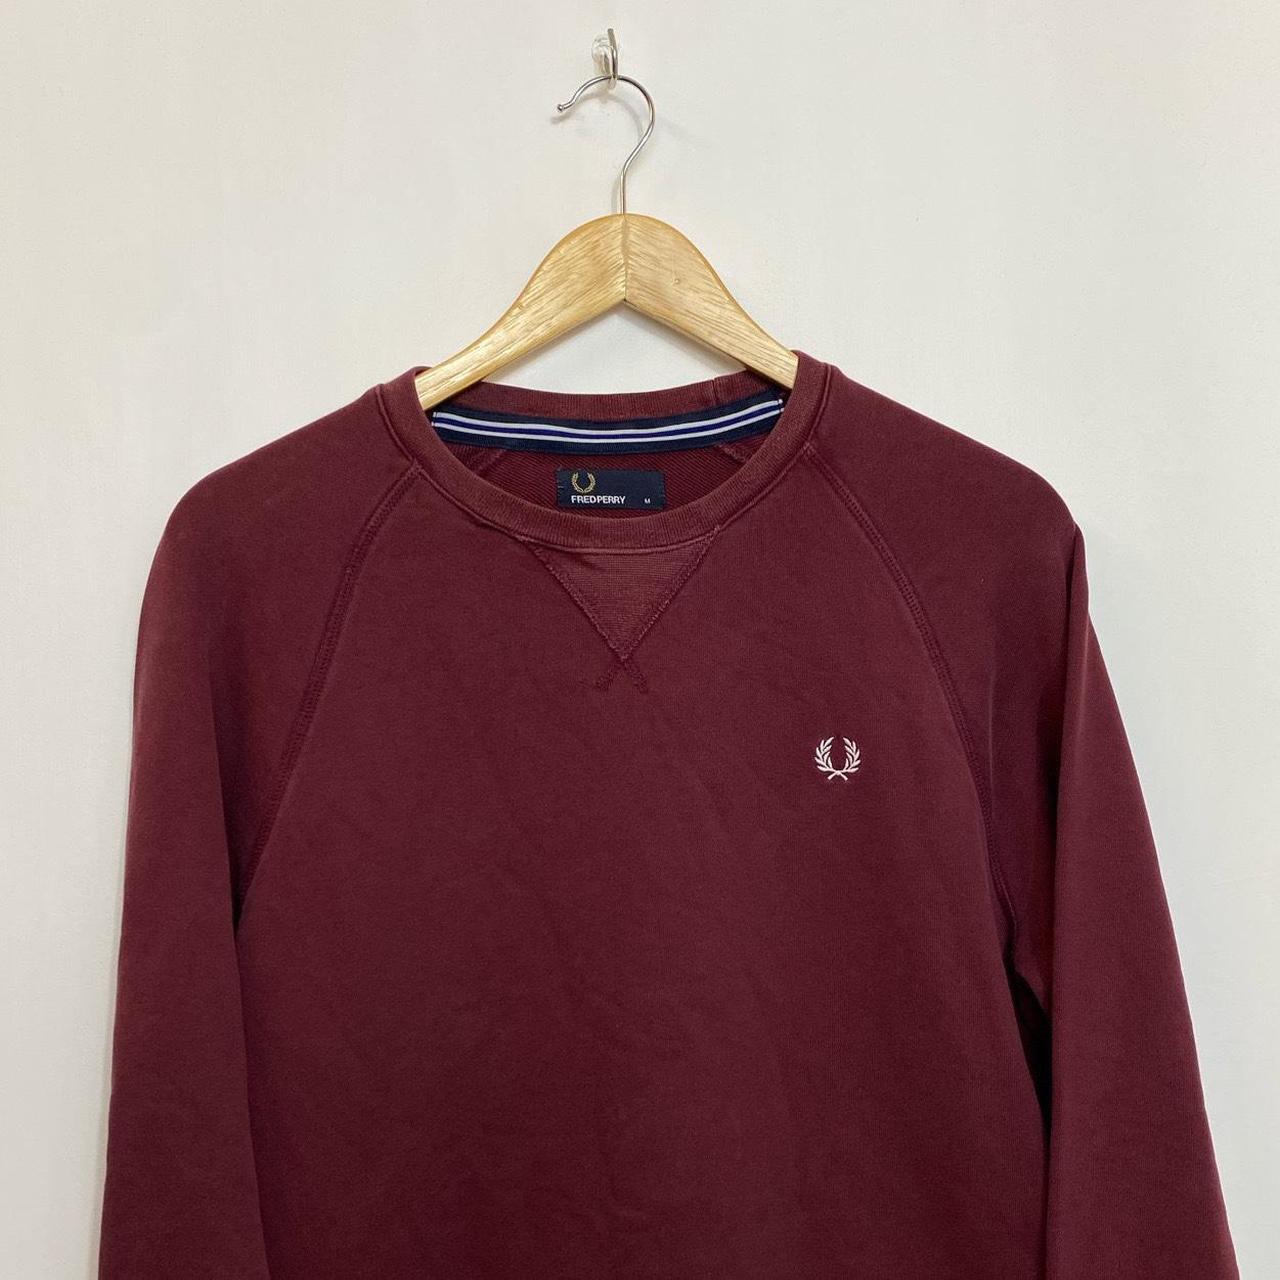 Fred Perry Burgundy Embroidered Wreath Chest Logo... - Depop